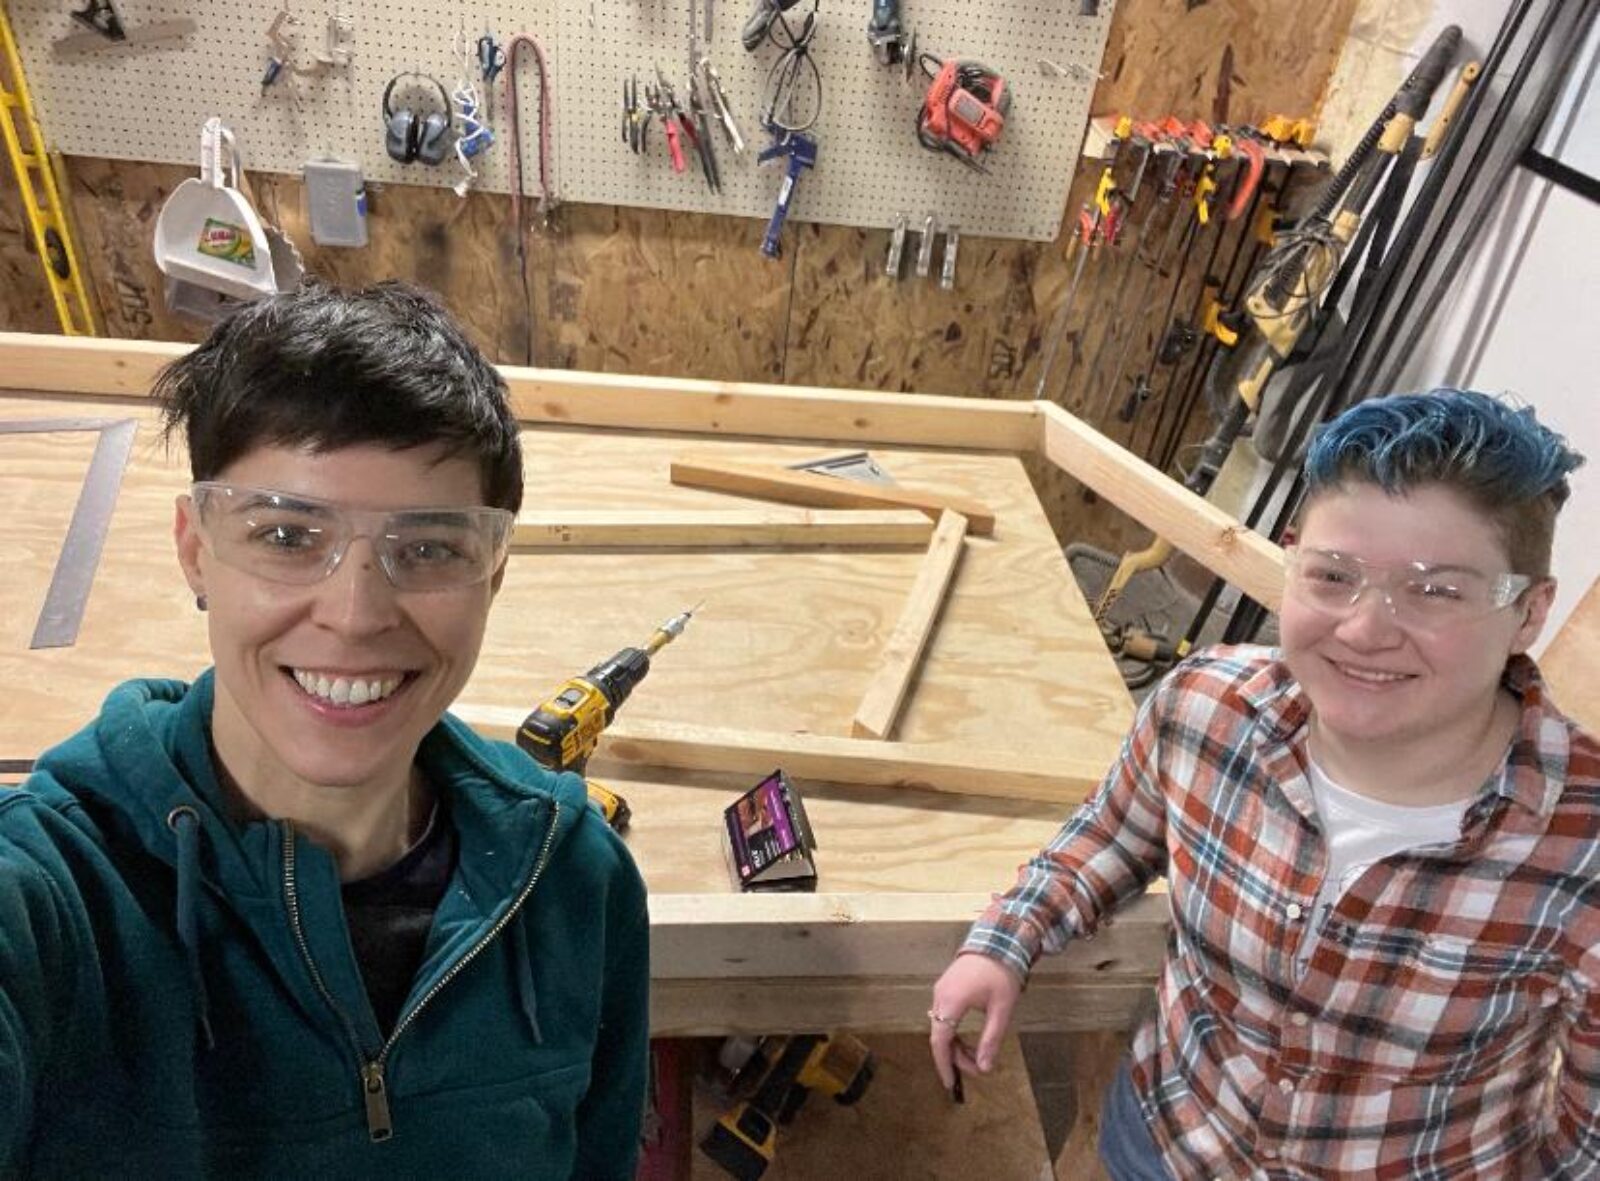 2 people in a build shop